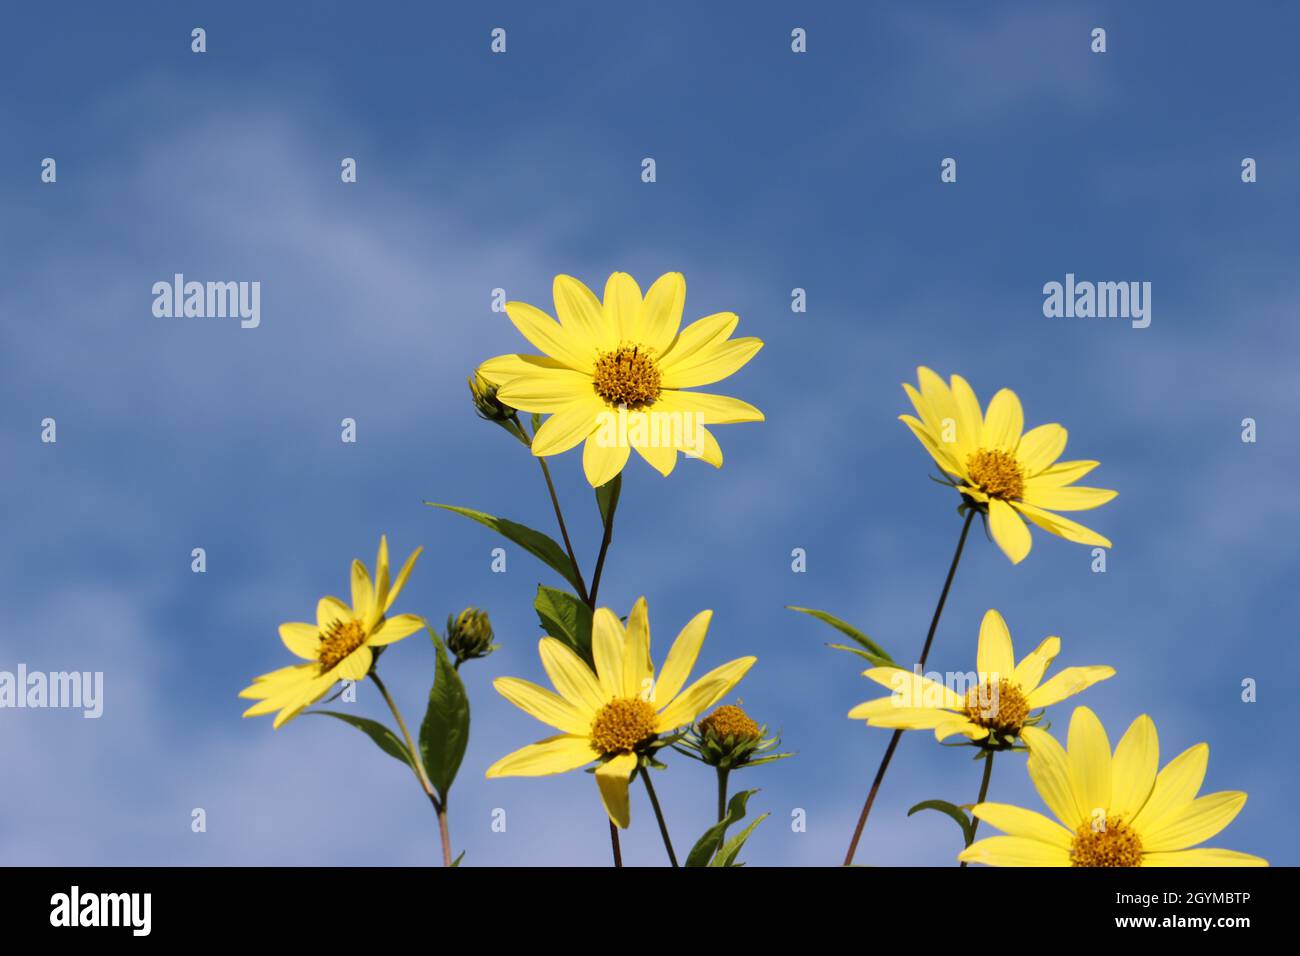 the beautiful yellow flowers of the perennial sunflower Helianthus microcephalus Lemon Queen shine in front of a deep blue sky background, copy-space Stock Photo